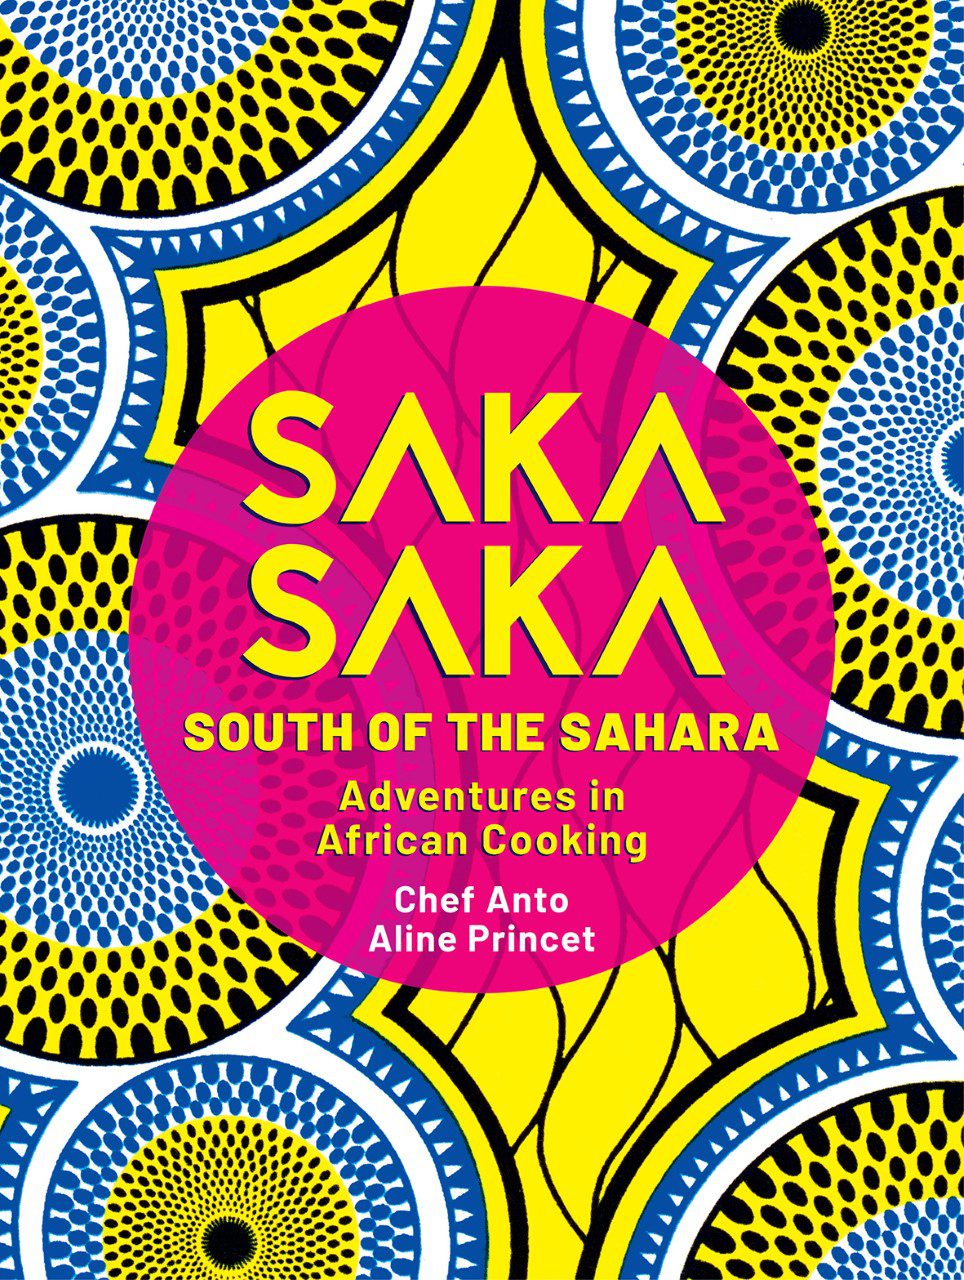 Saka Saka: South of the Sahara - Adventures in African Cooking by Anto Cocagne | African Cookbook - Paperbacks & Frybread Co.